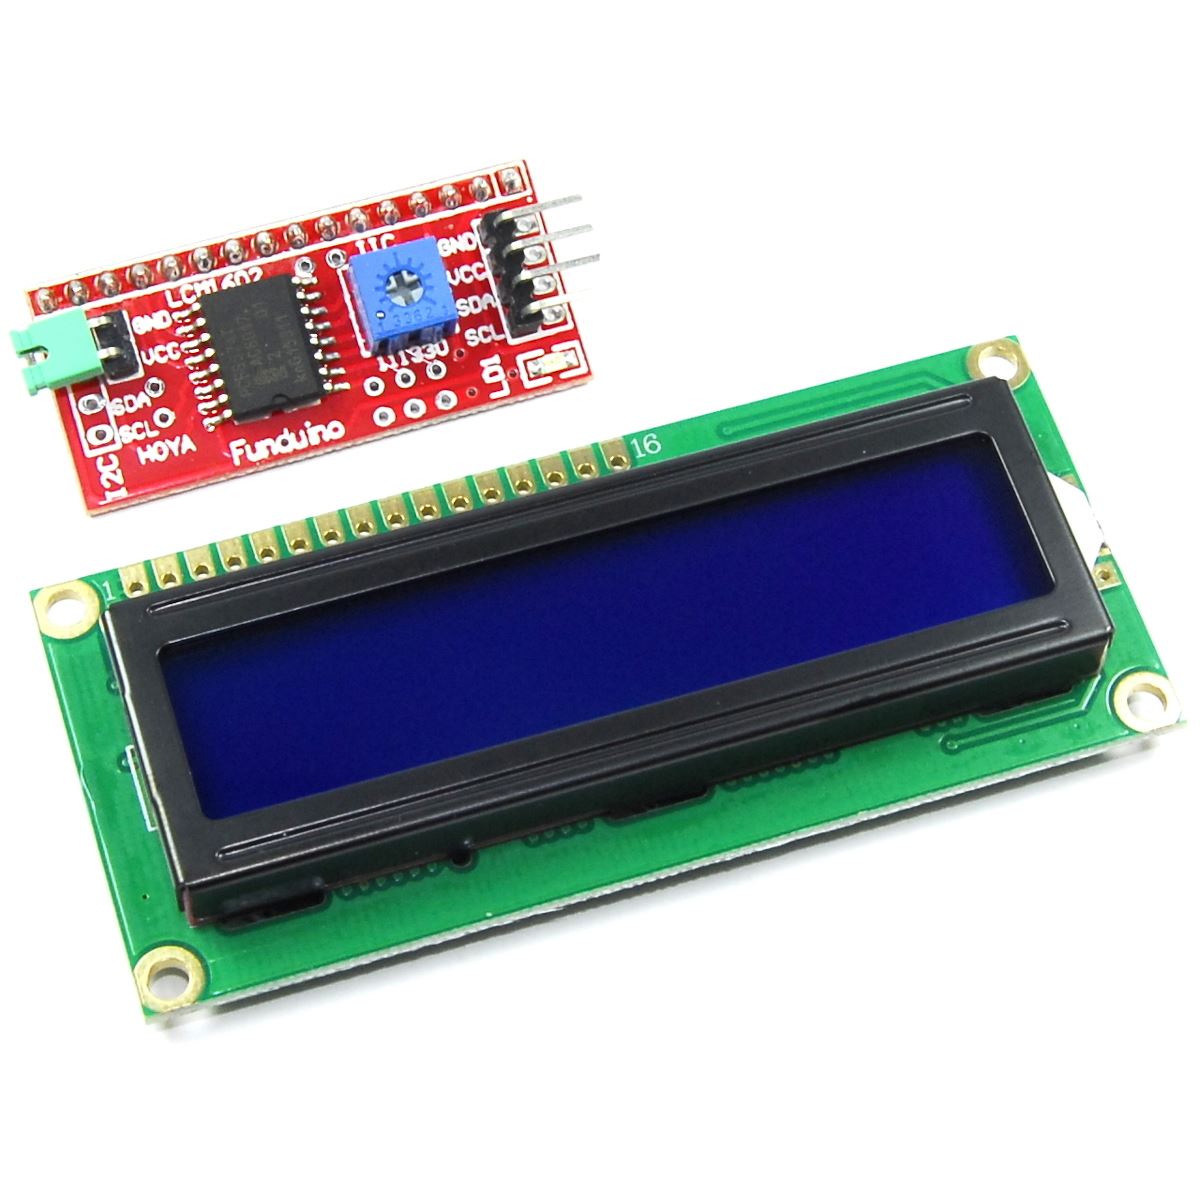 16x2 Blue LCD with Funduino I2C Interface MB-063 1602 HD44780